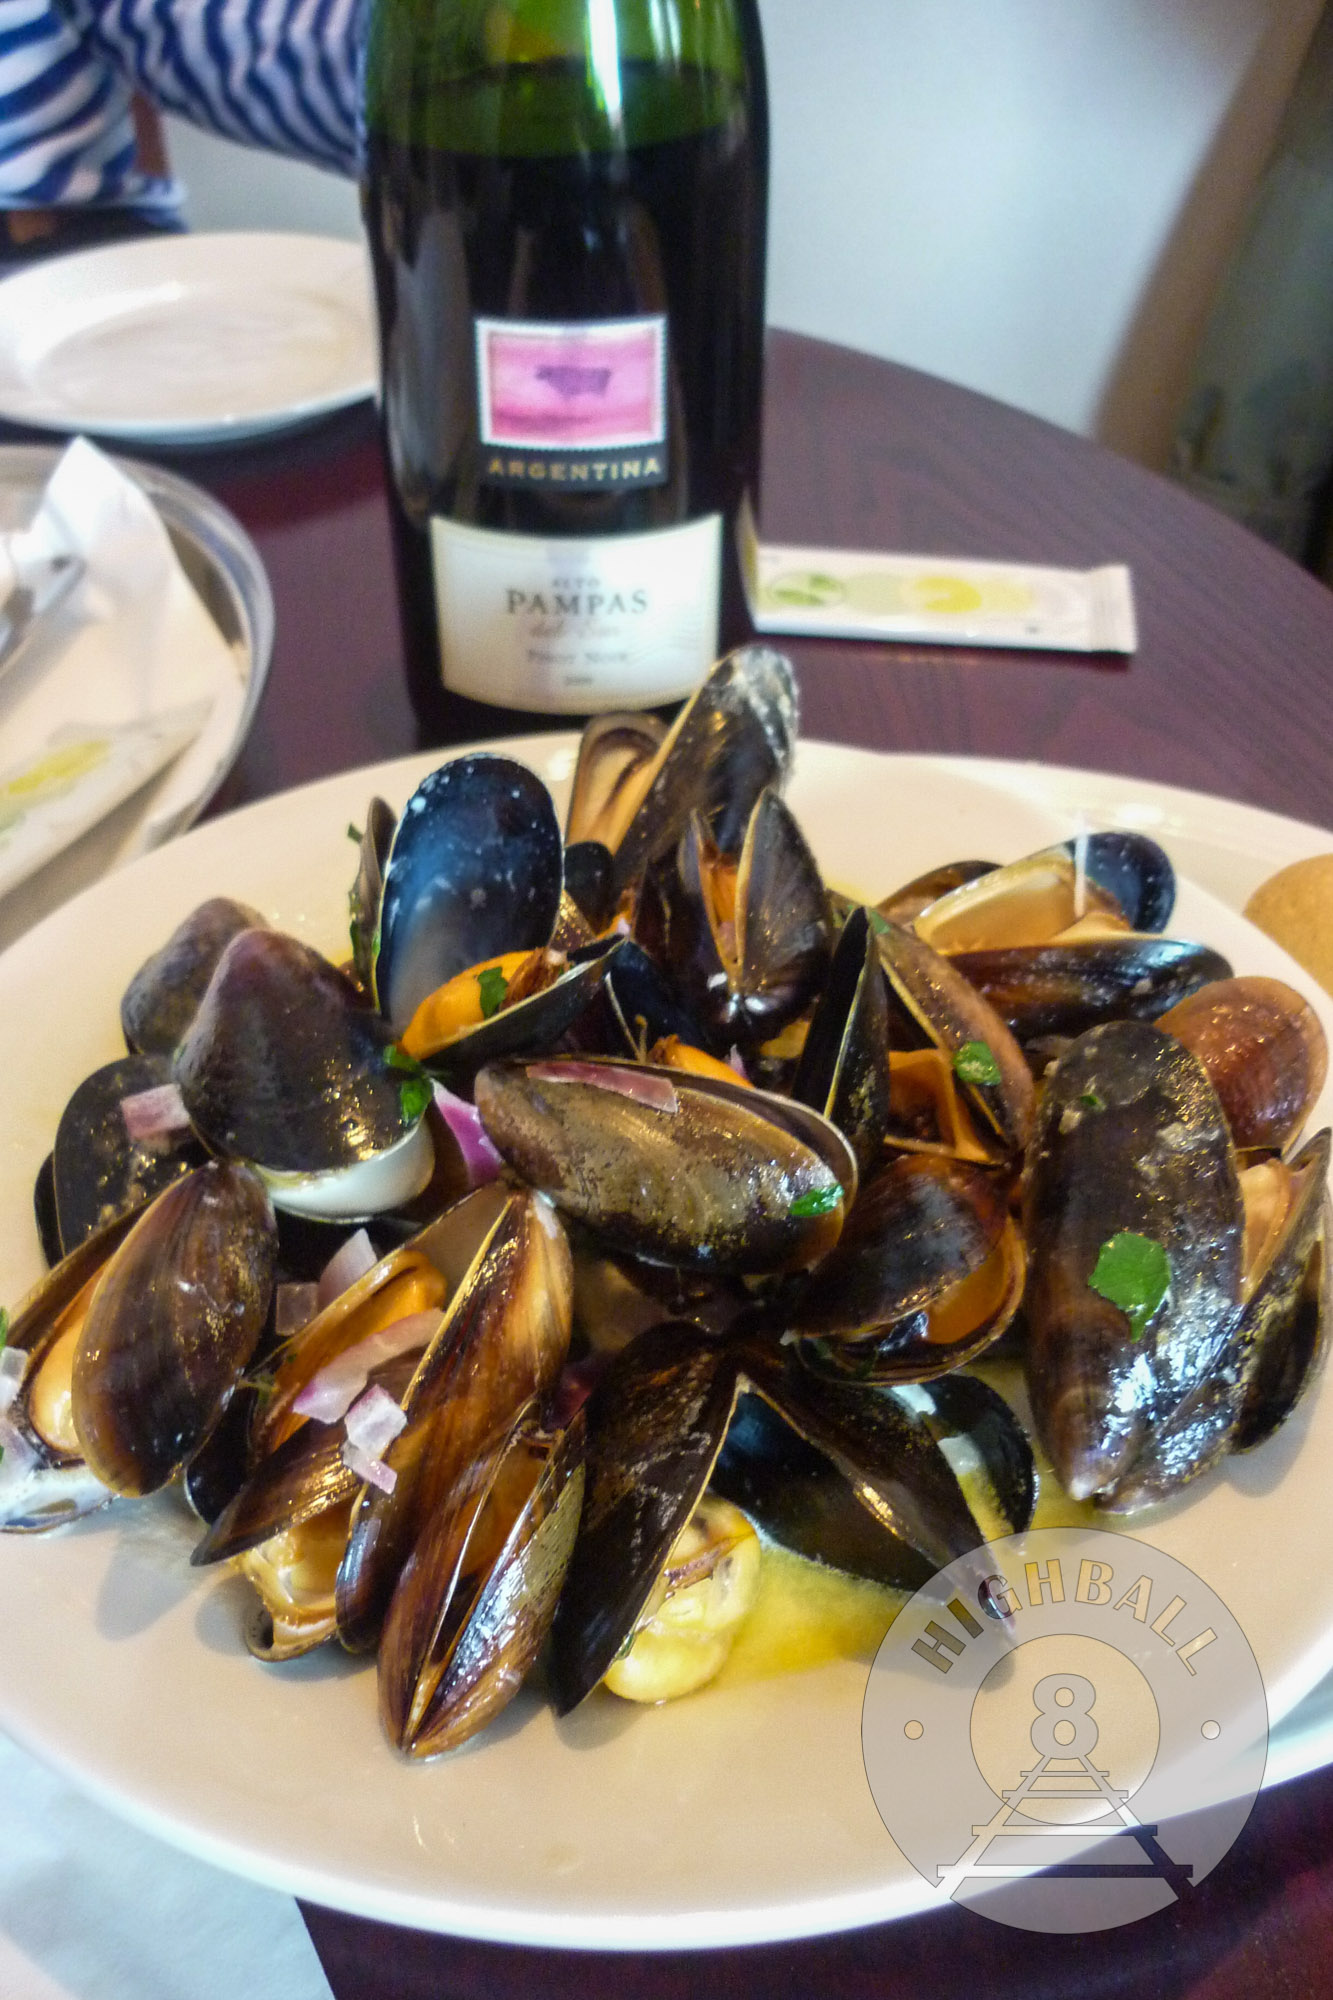 A plate of mussels (the best mussels ever) at The Cornerstone restaurant, Mallaig, Scotland, UK, 2010.